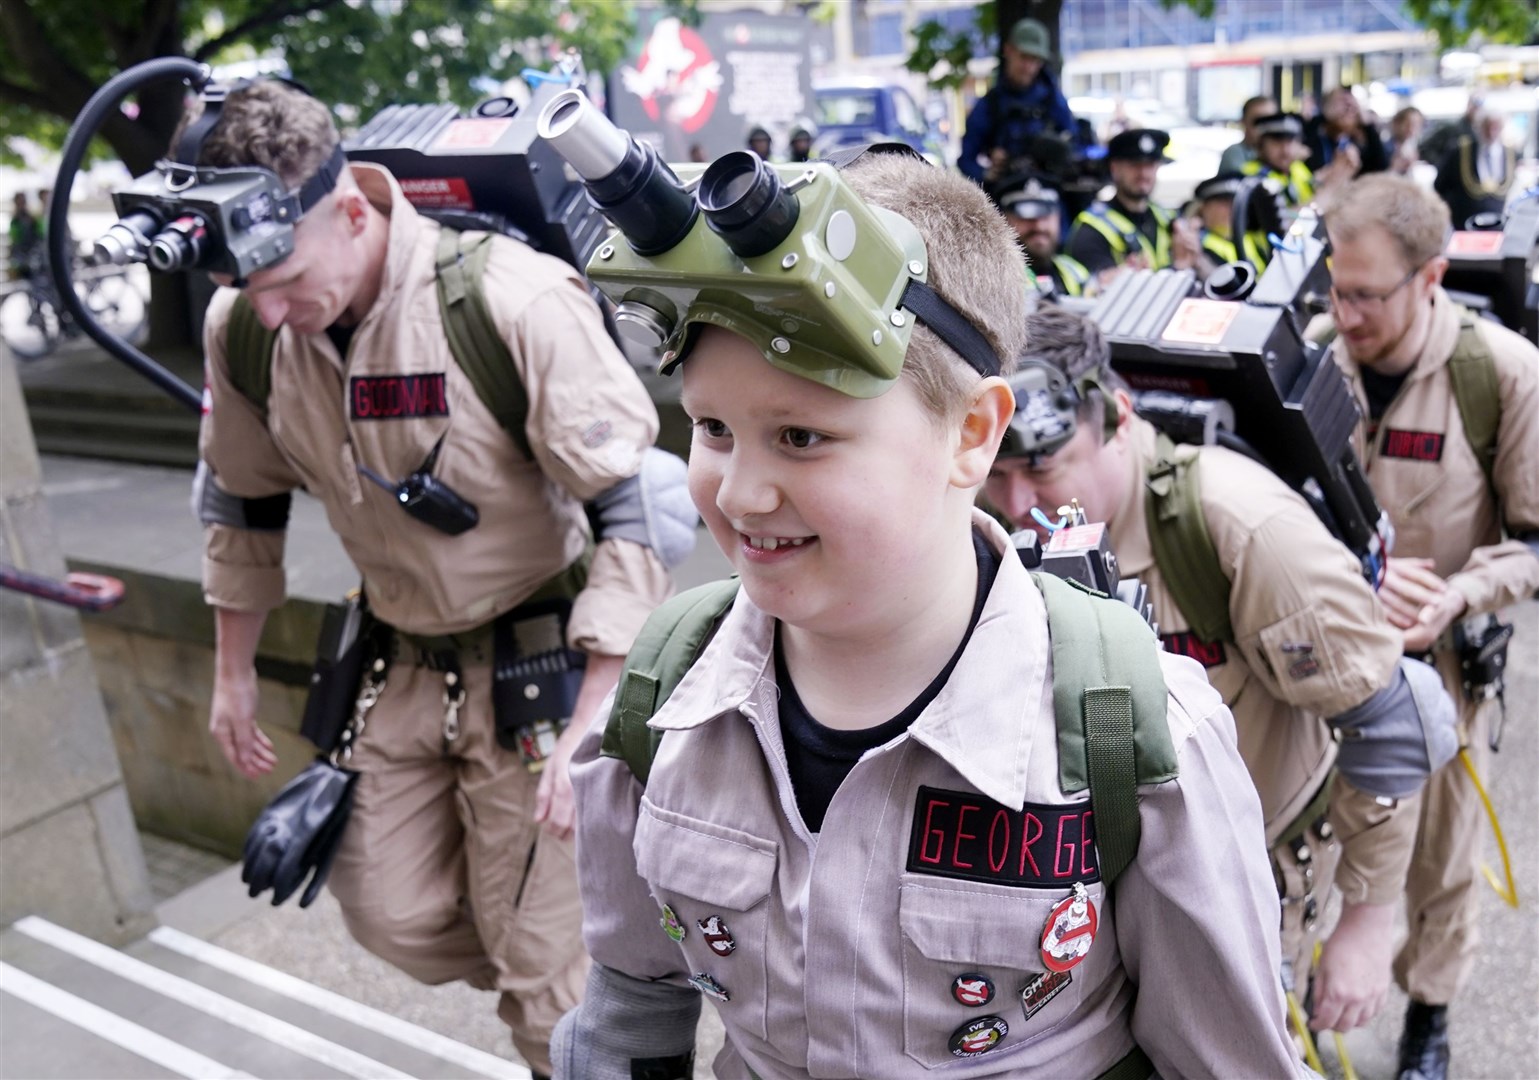 Ghostbusters superfan George Hinkins makes his way to search Leeds Central Library (Danny Lawson/PA)